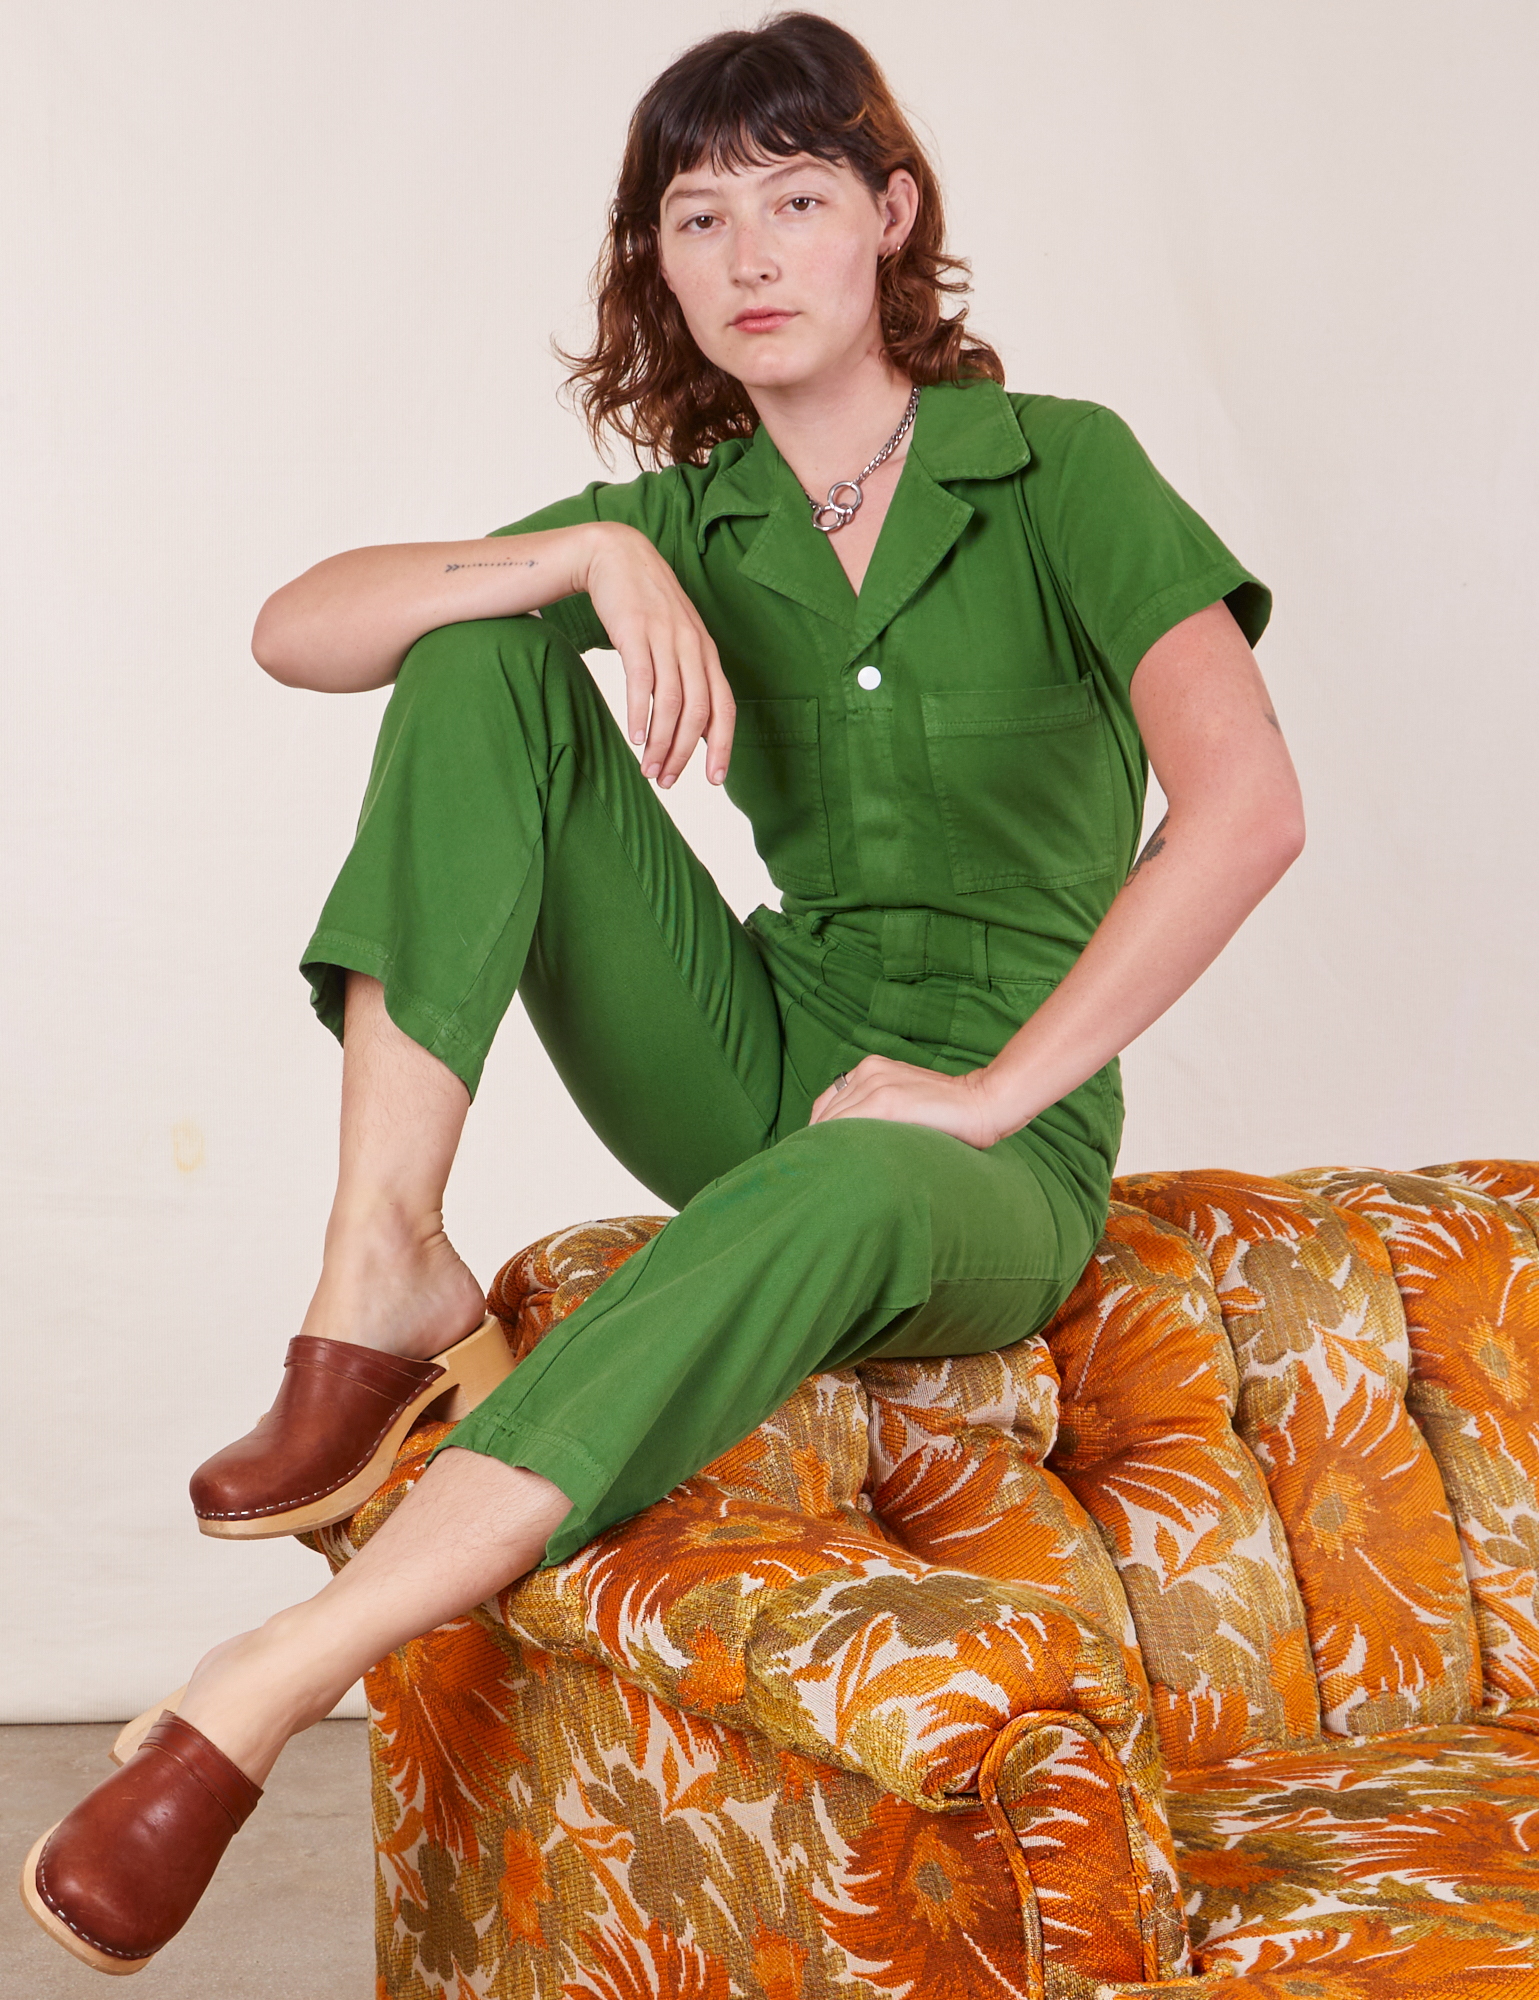 Alex is sitting on a floral couch wearing Short Sleeve Jumpsuit in Lawn Green